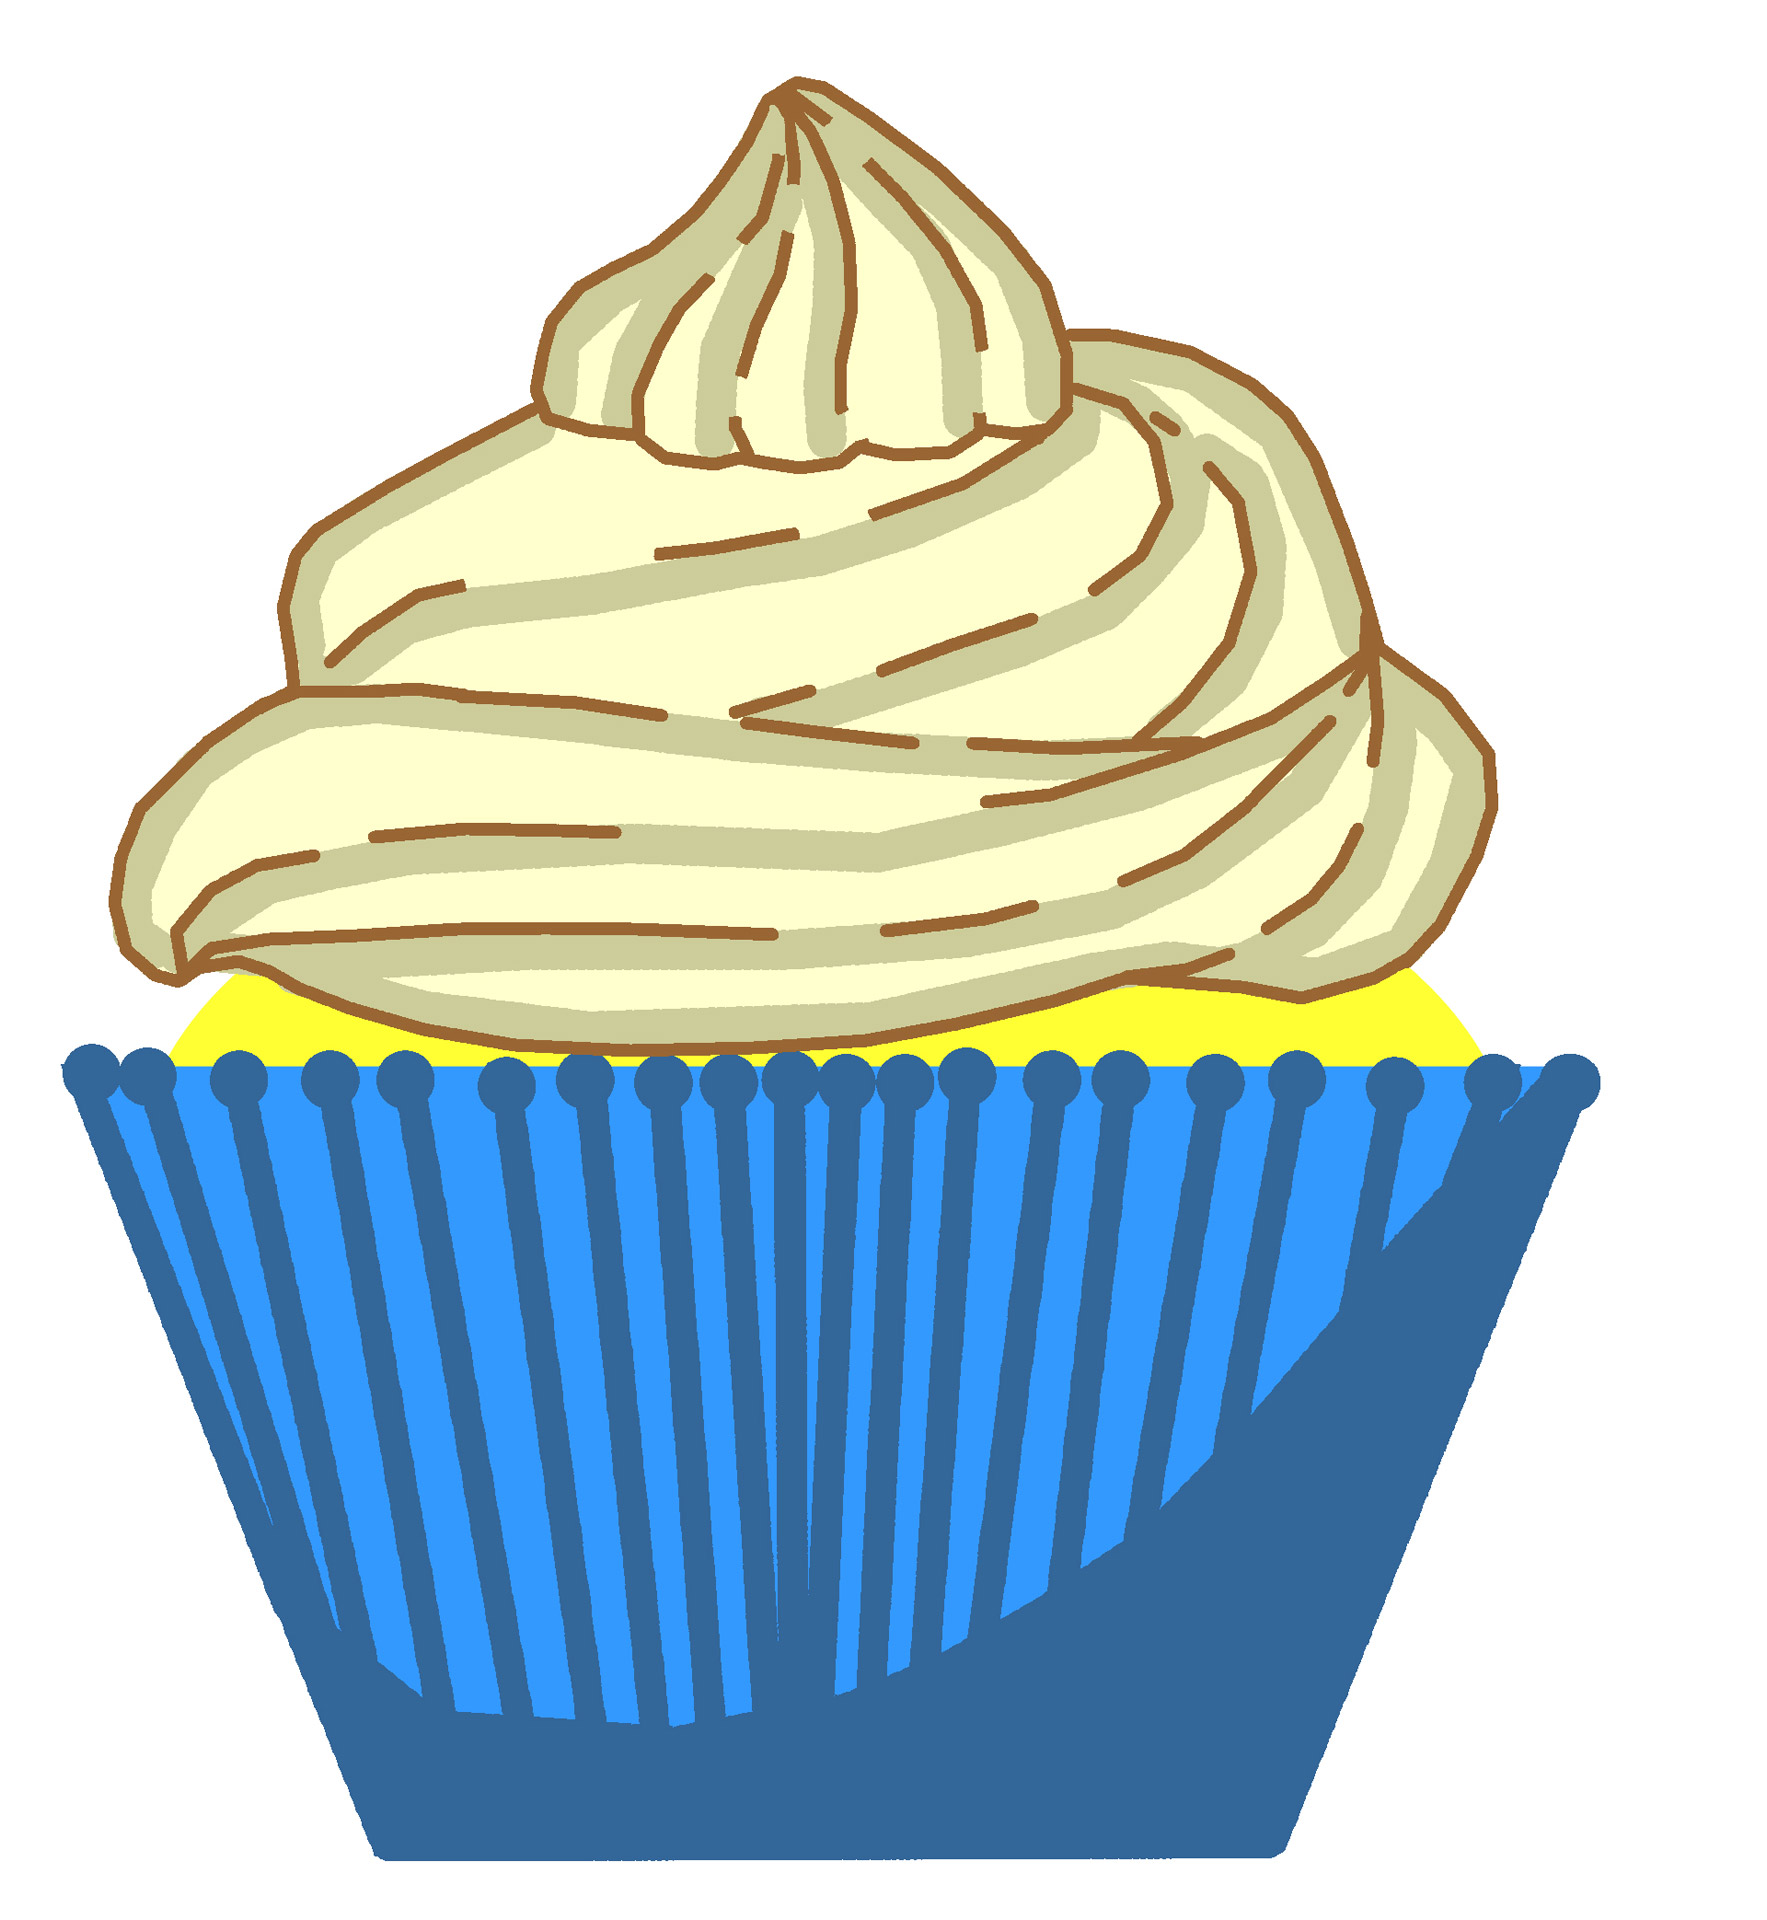 free-cupcakes-cliparts-download-free-cupcakes-cliparts-png-images